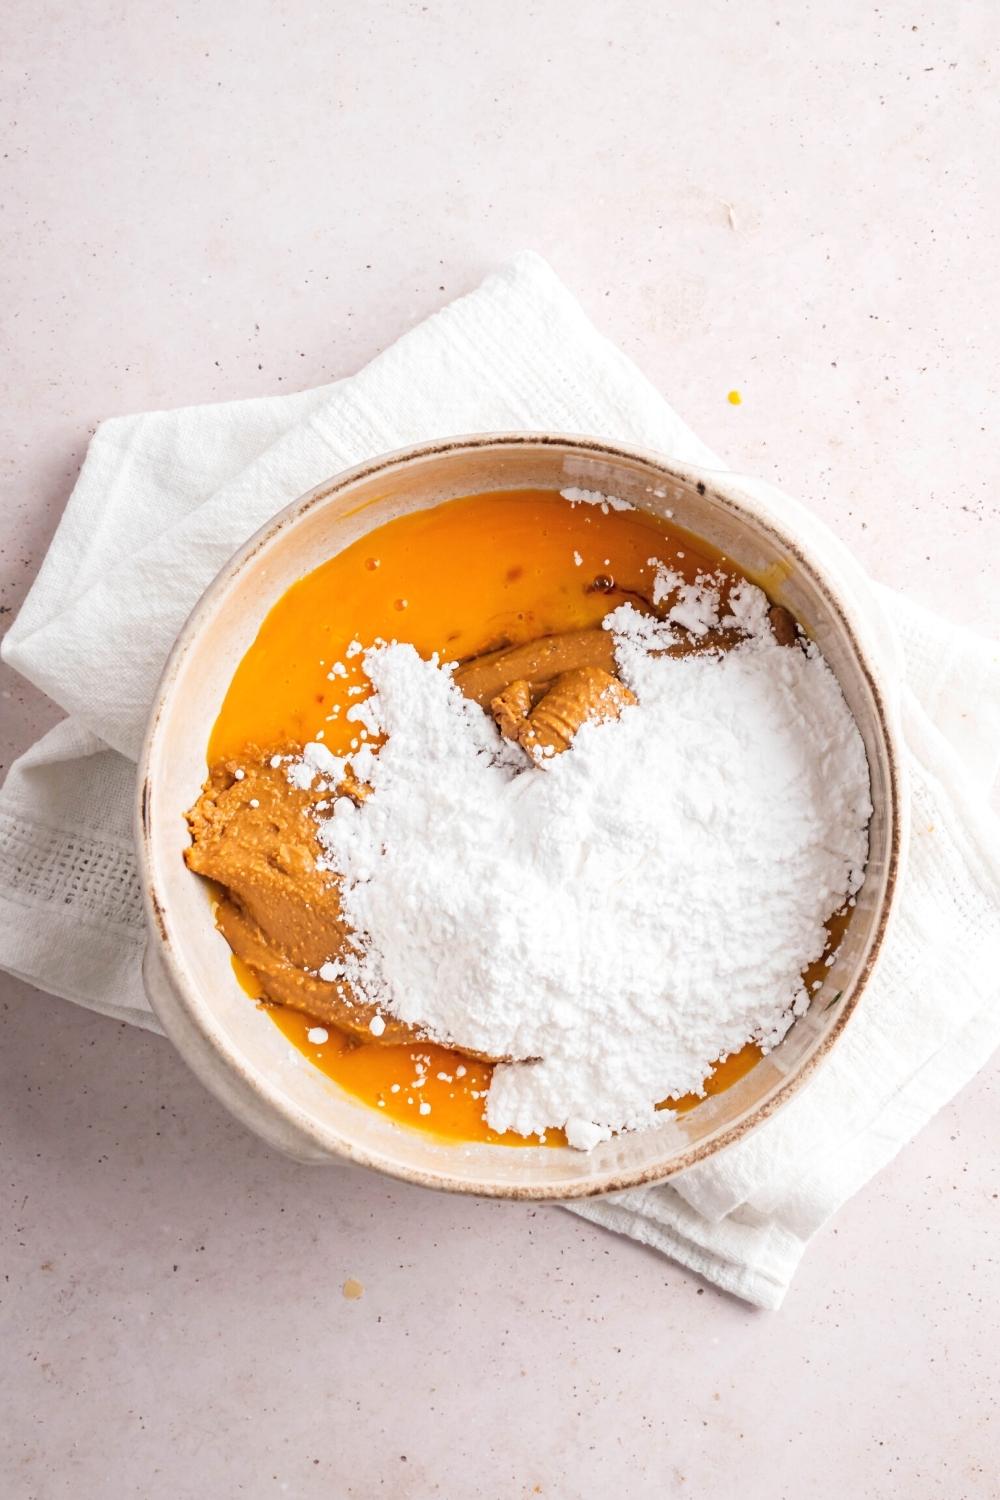 Confectioner erythritol, peanut butter, and egg yolk all in a white bowl on top of a white tablecloth on a white counter.